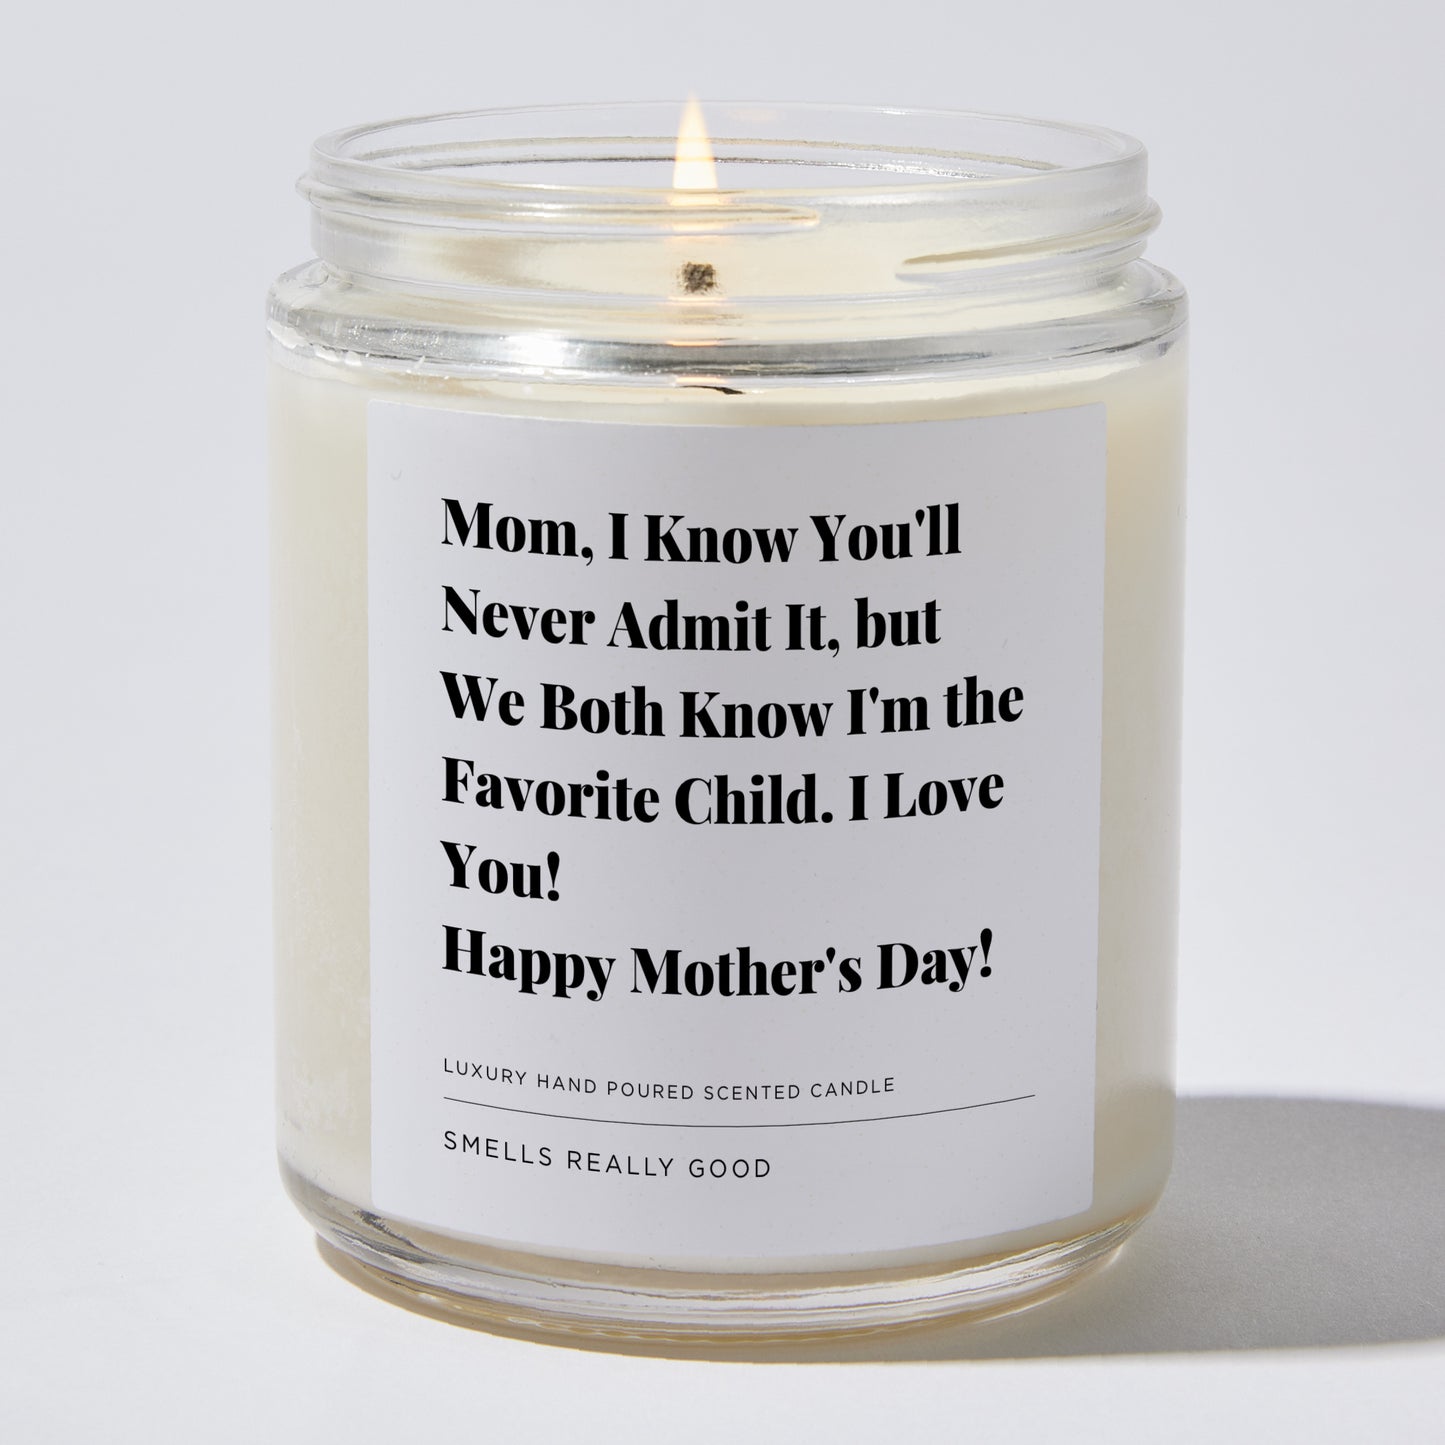 Gift for Mom - Mom, I know you'll never admit it, but we both know I'm the favorite child. I Love You! Happy Mother's Day! - Candle